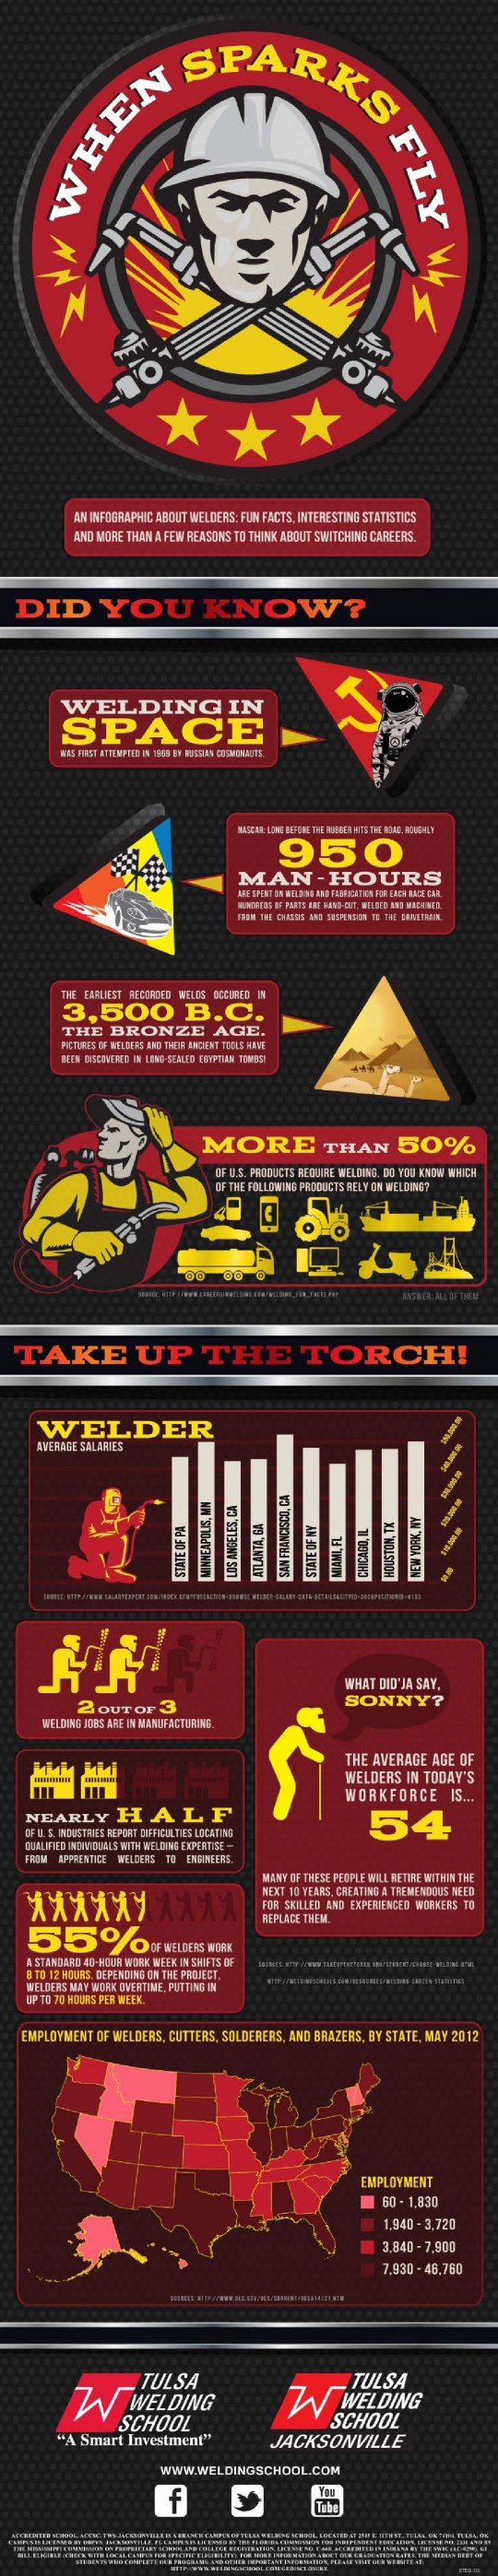 Welding Fun Facts & Statistics to Make You Switch Your Career